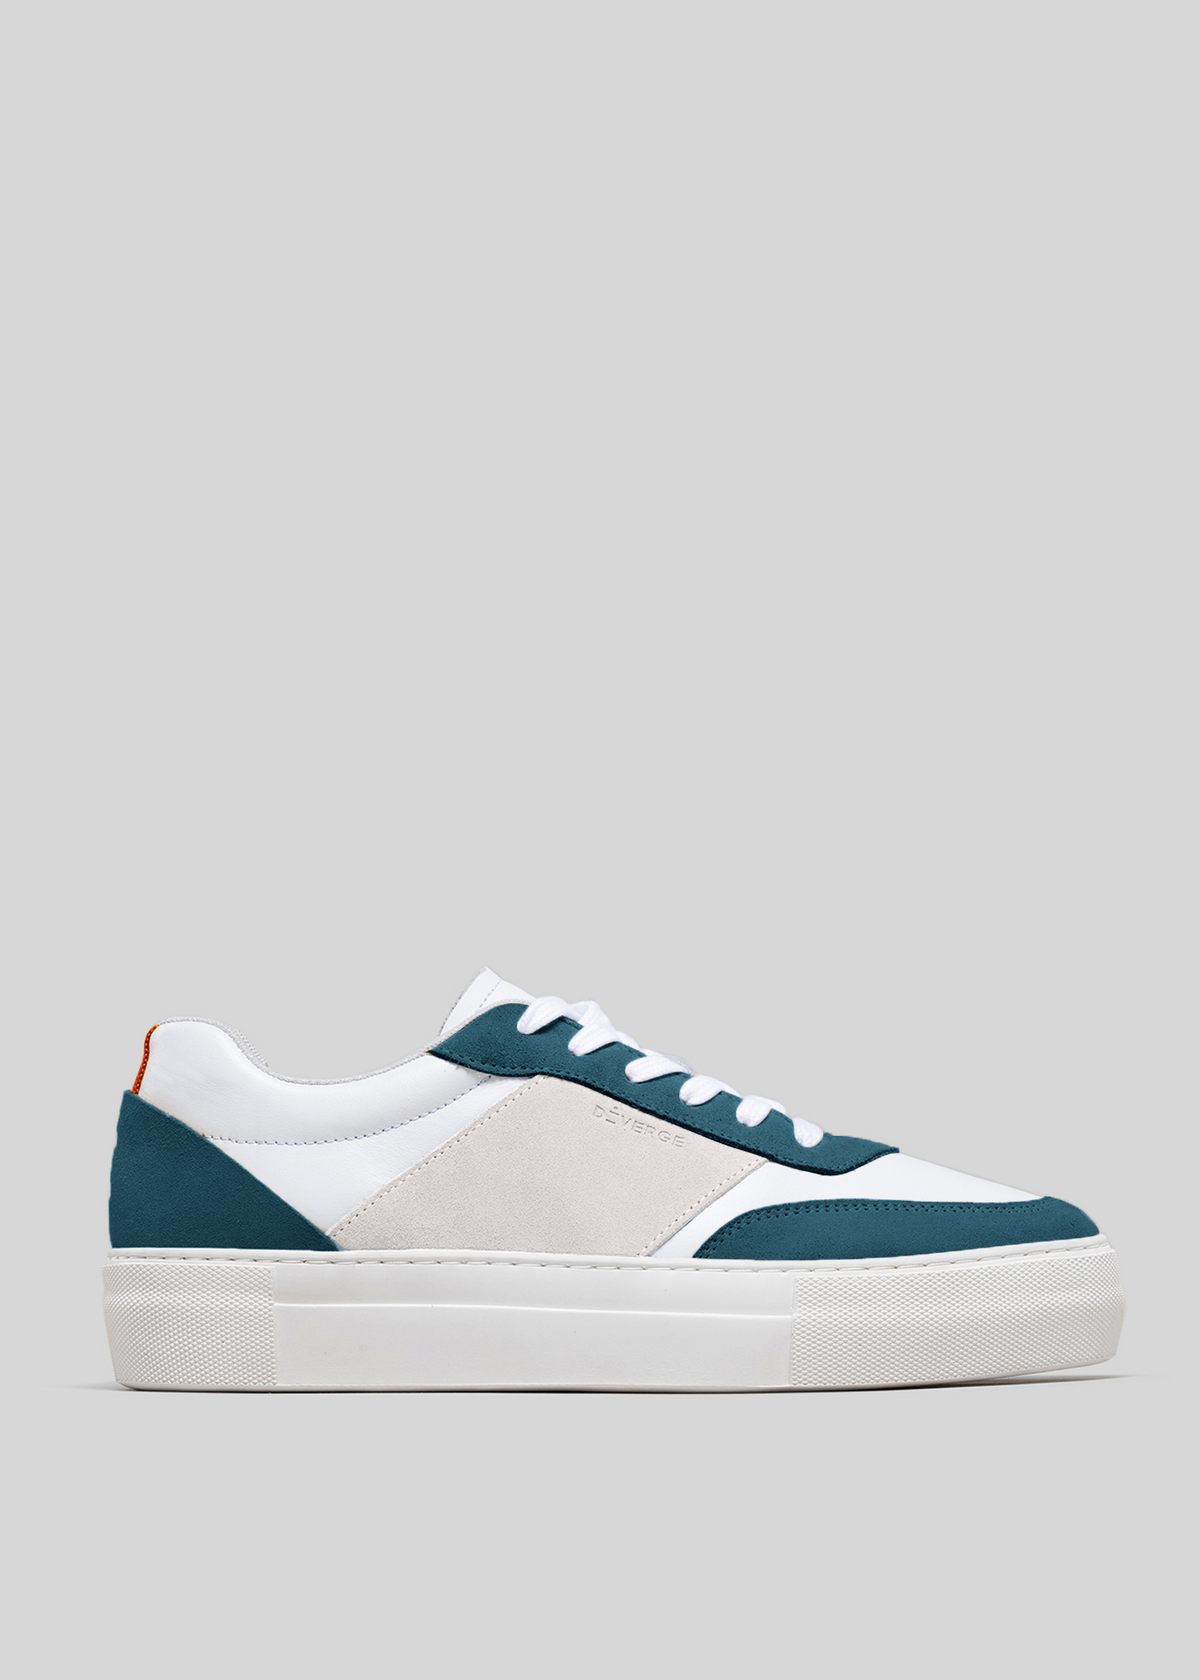 A V28 White & Petrol Blue with a white sole and white laces, handcrafted in Portugal using premium Italian leathers, is displayed against a plain gray background.